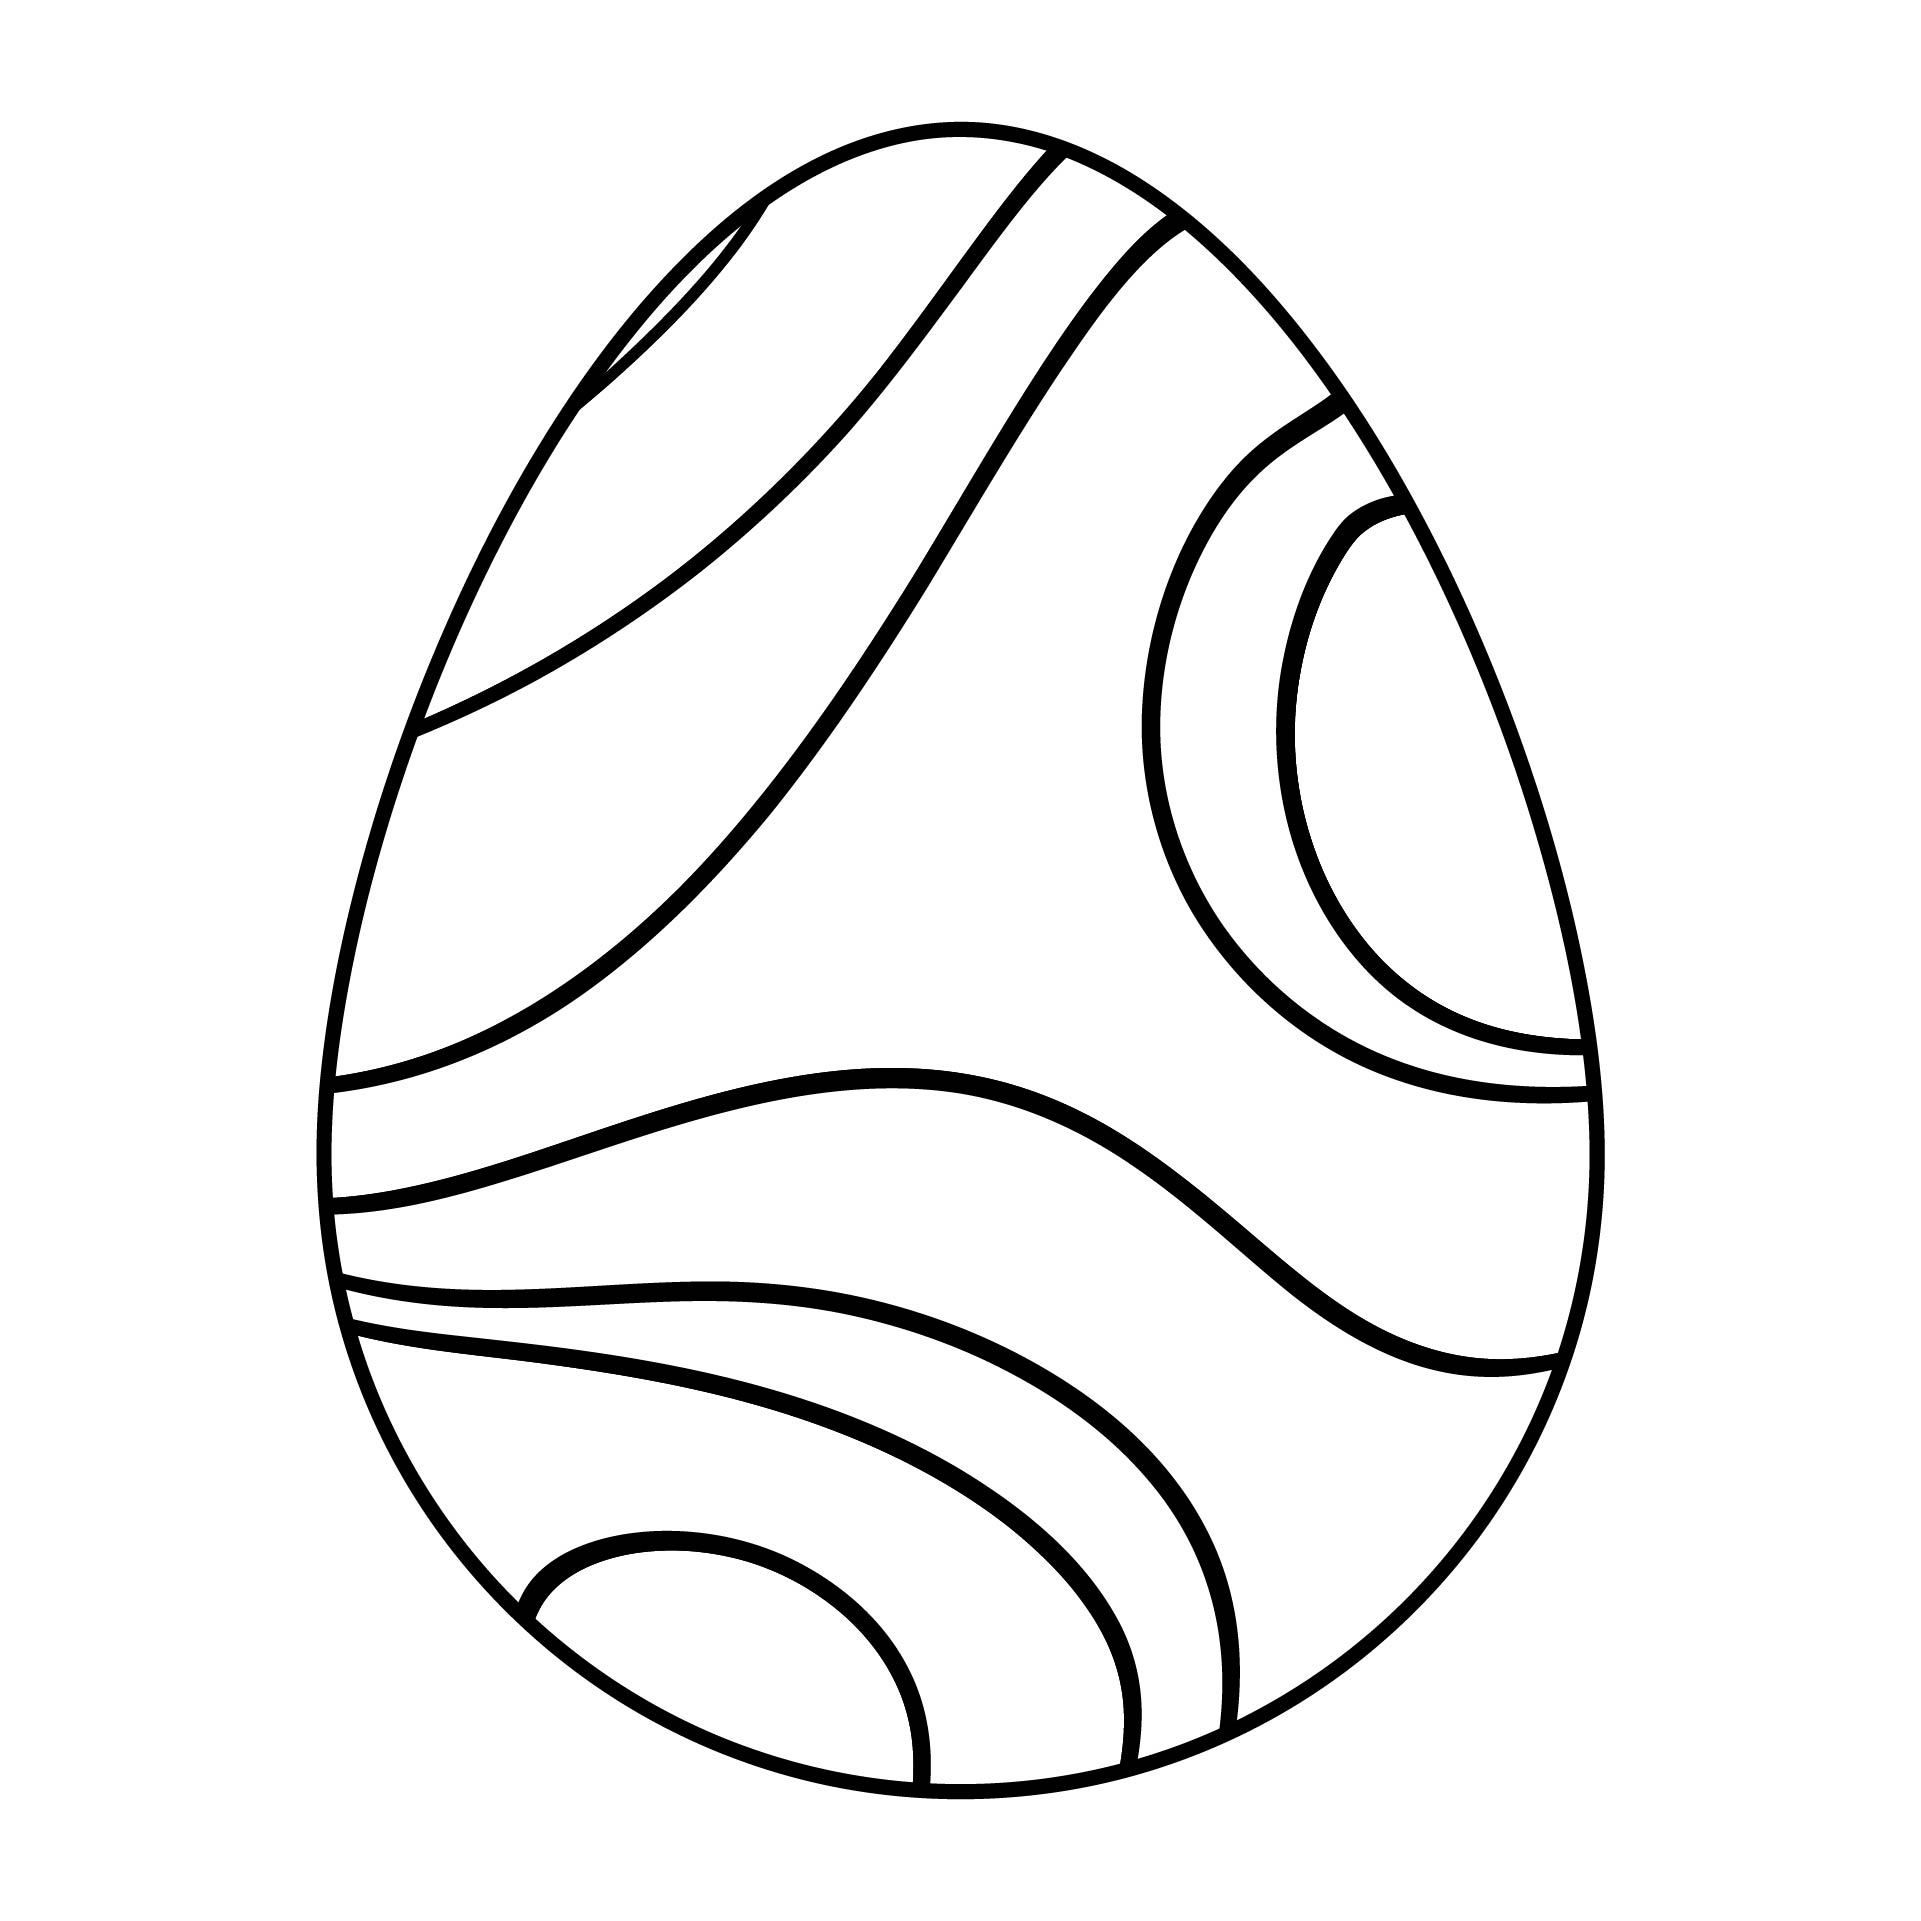 cracked-egg-template-printable